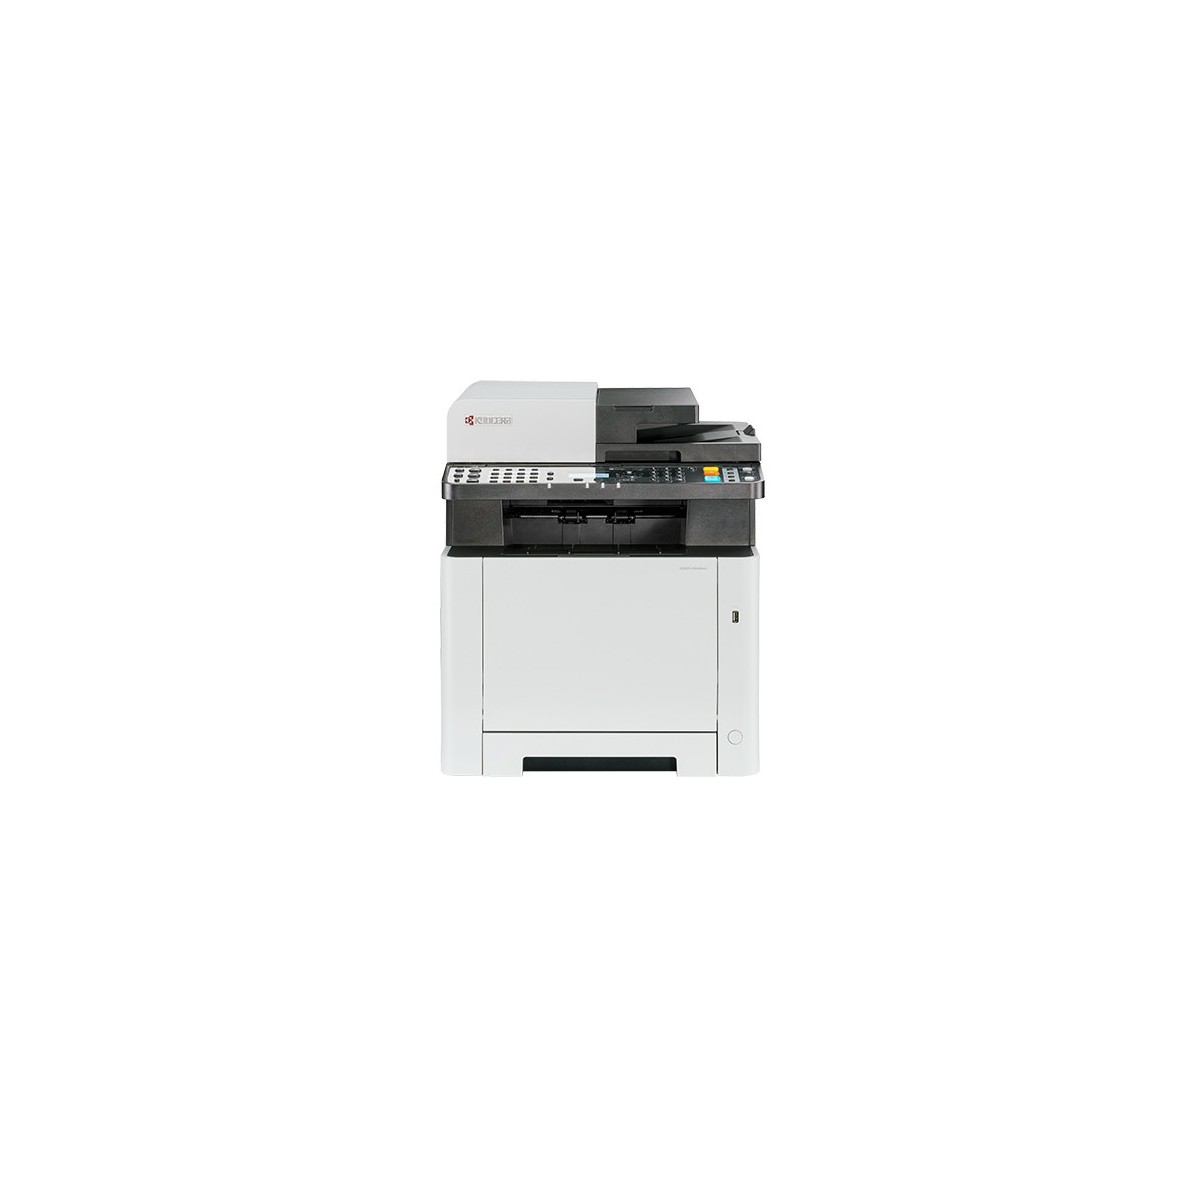 Kyocera ECOSYS MA2100CWFX - Multifunction Printer - Colored